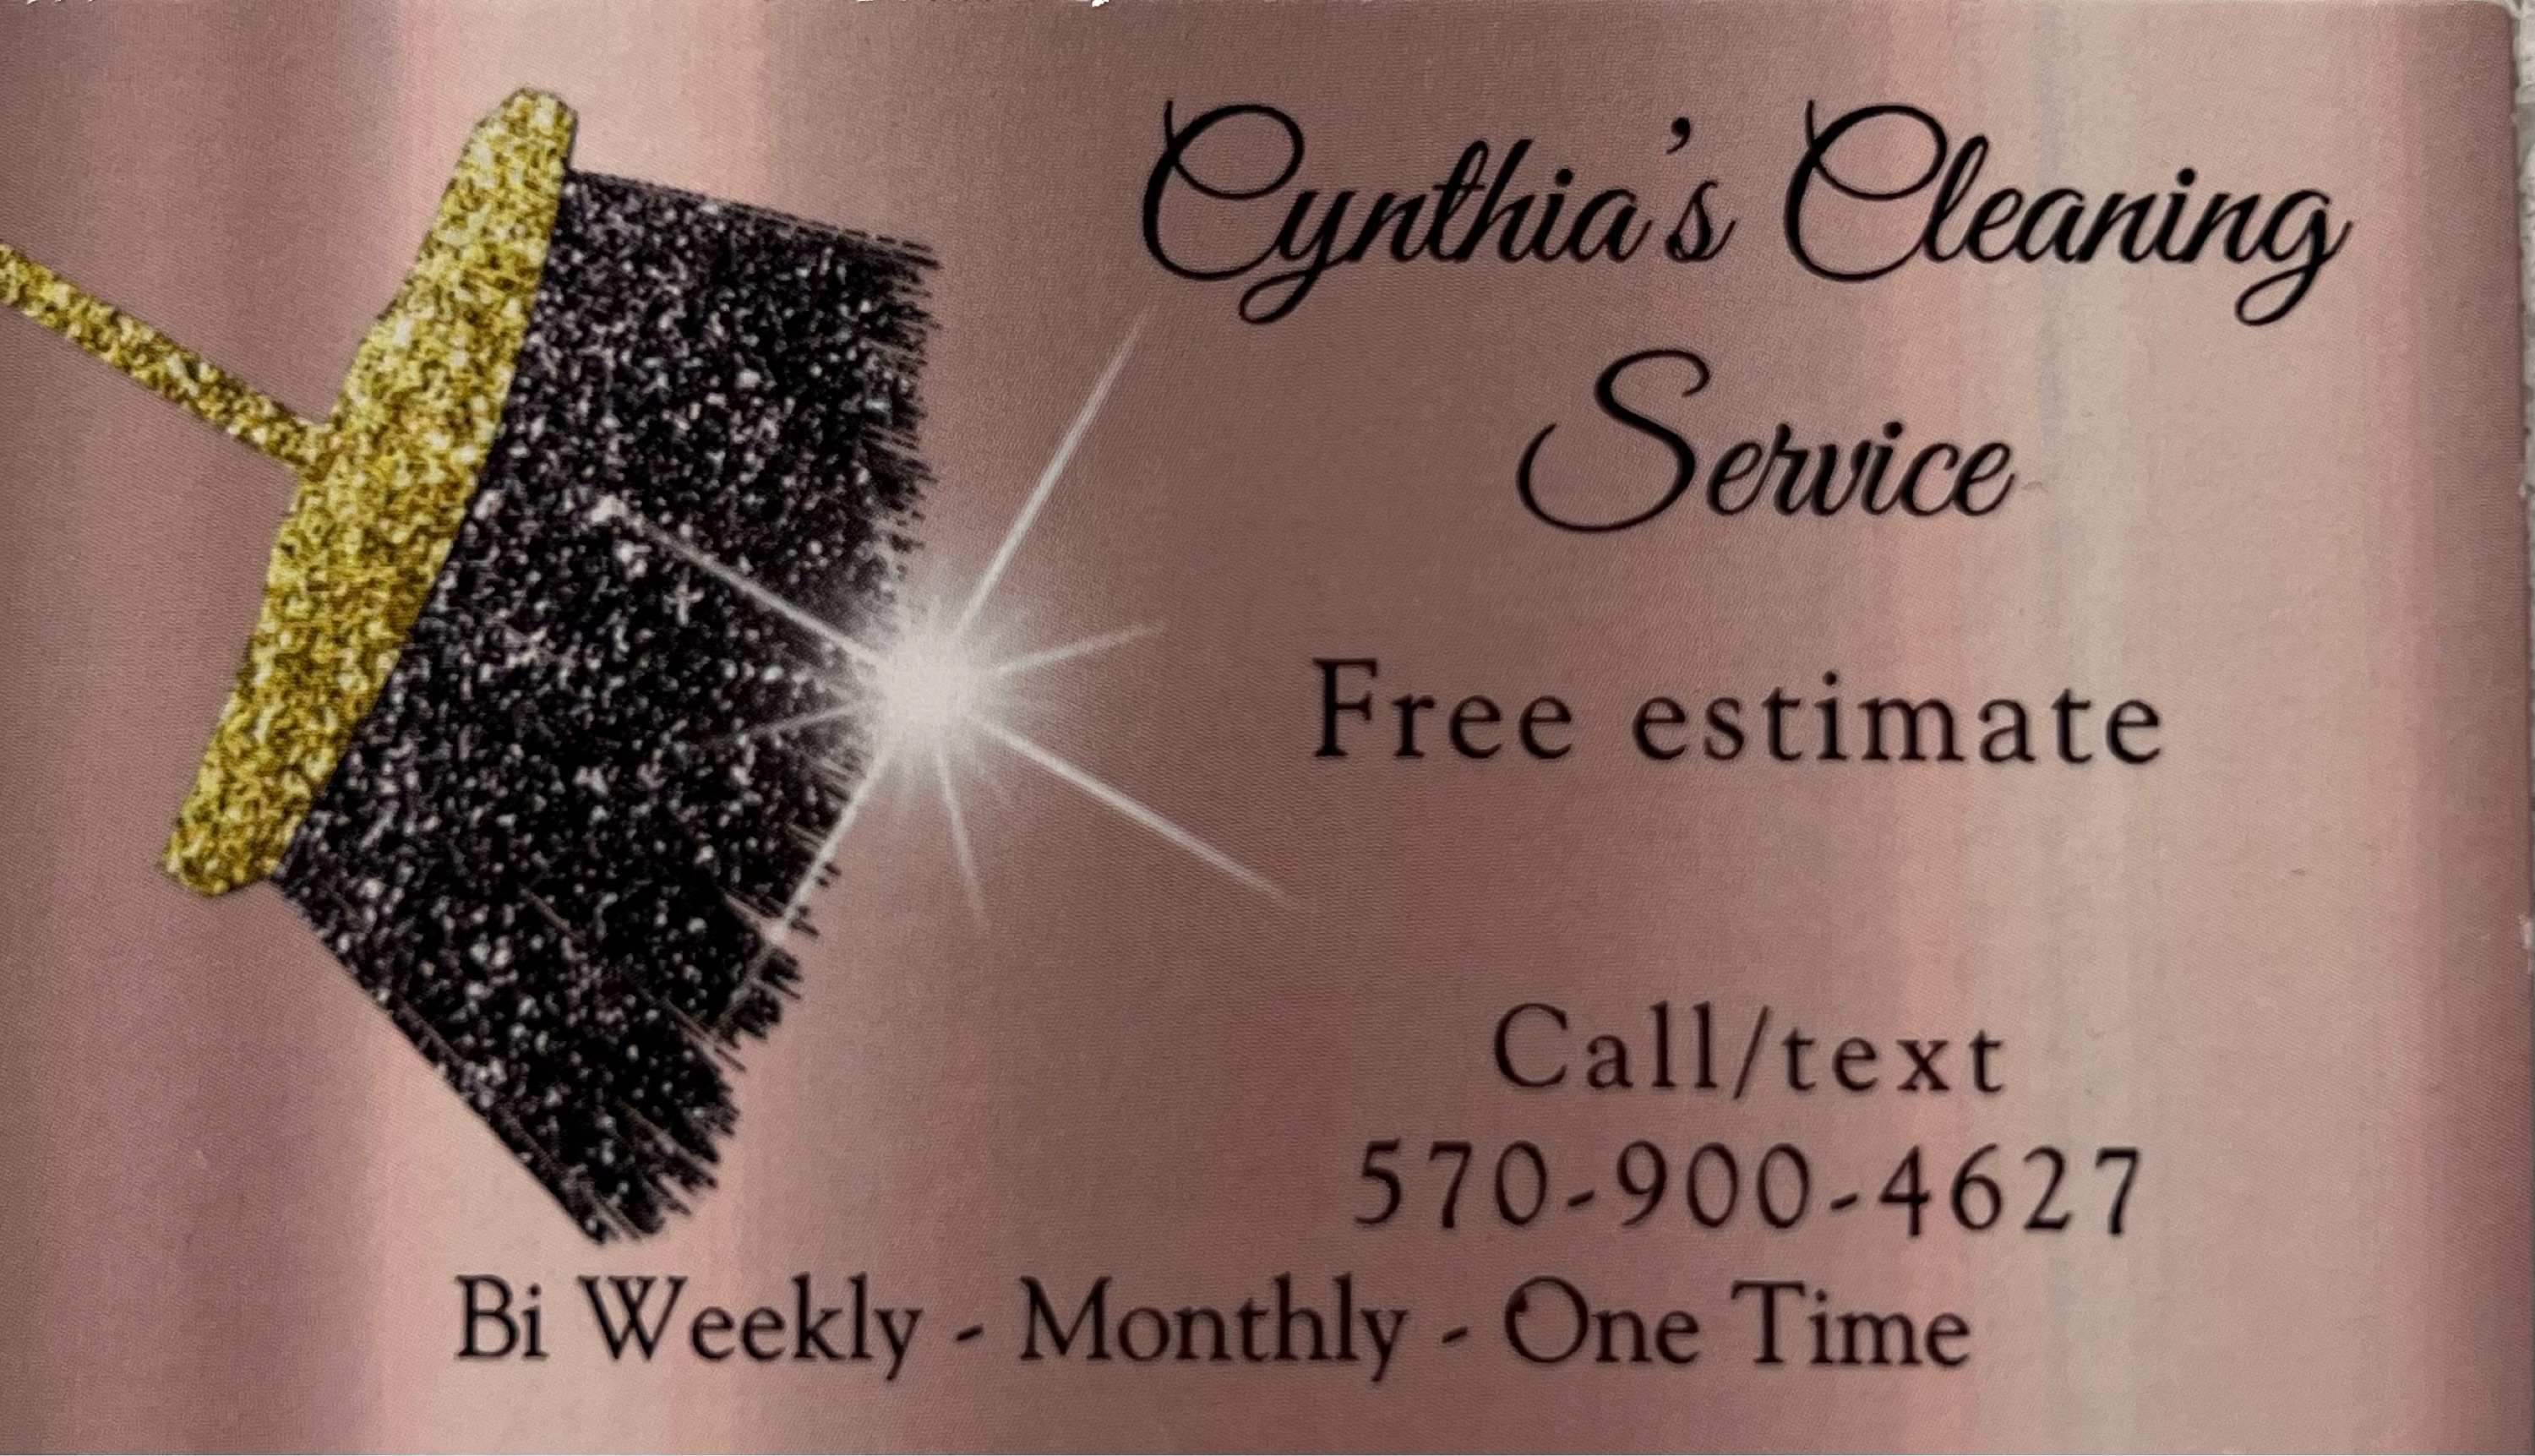 Cynthia's Cleaning Service Logo